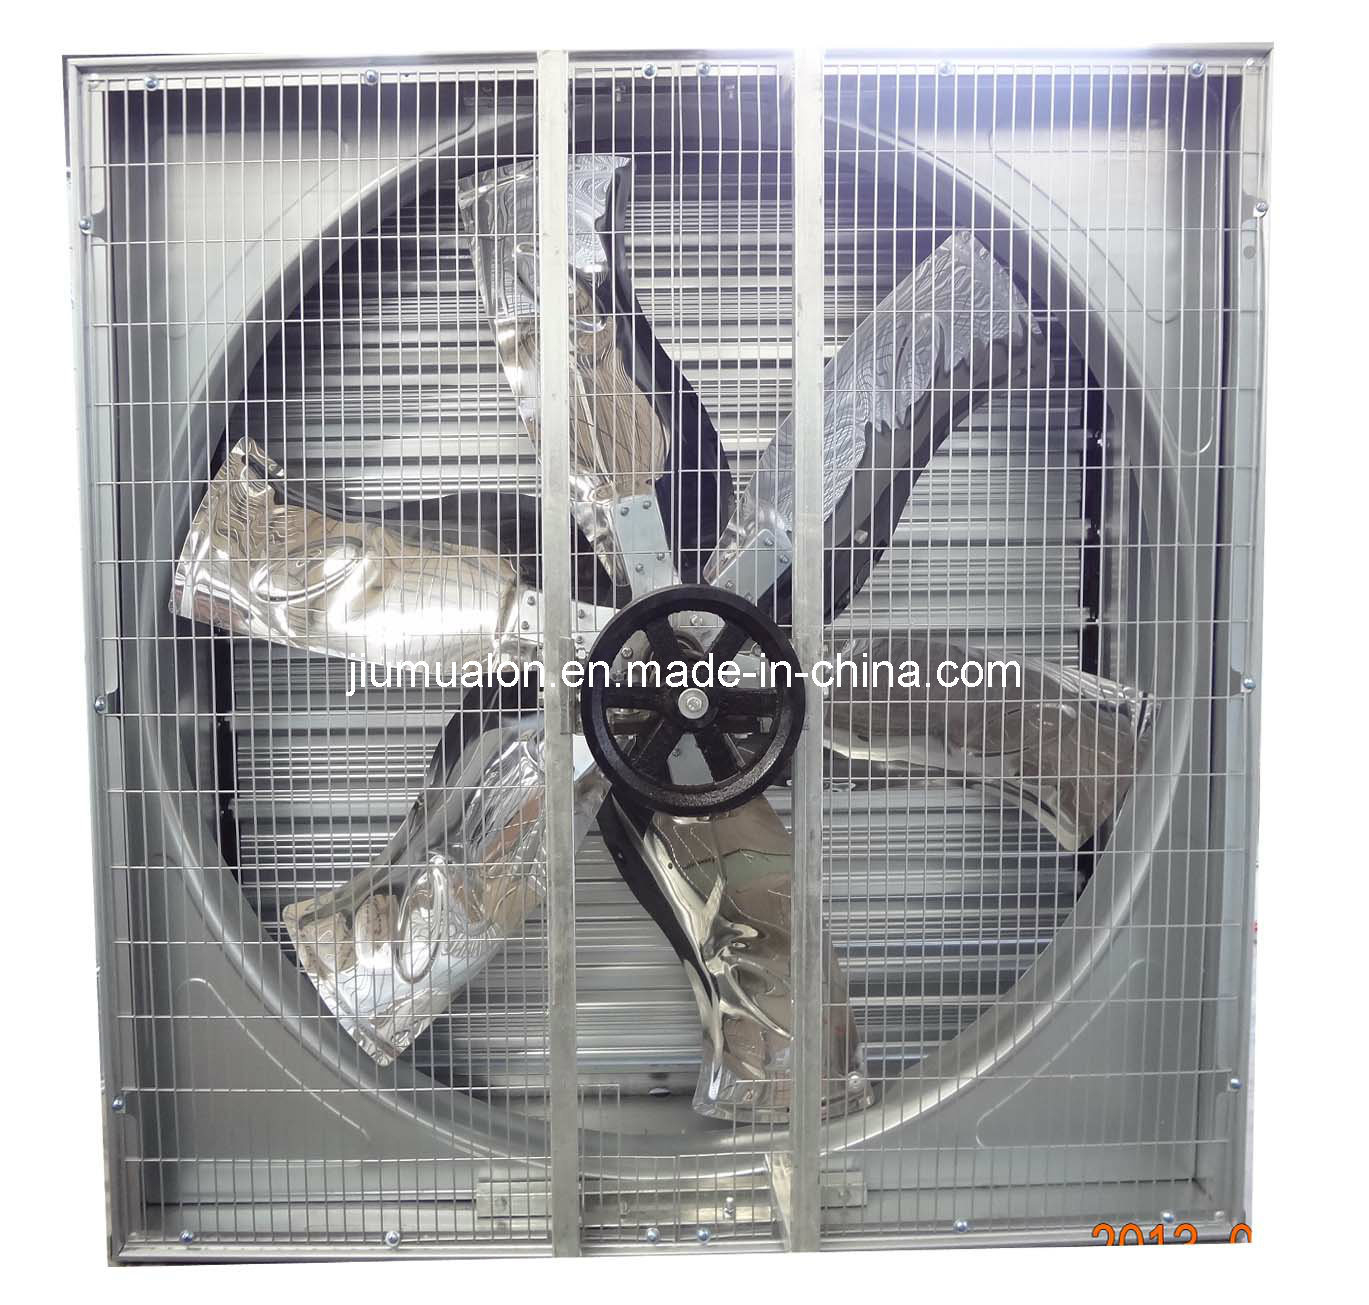 Cooling Fan with Energy Saving and More Efficient